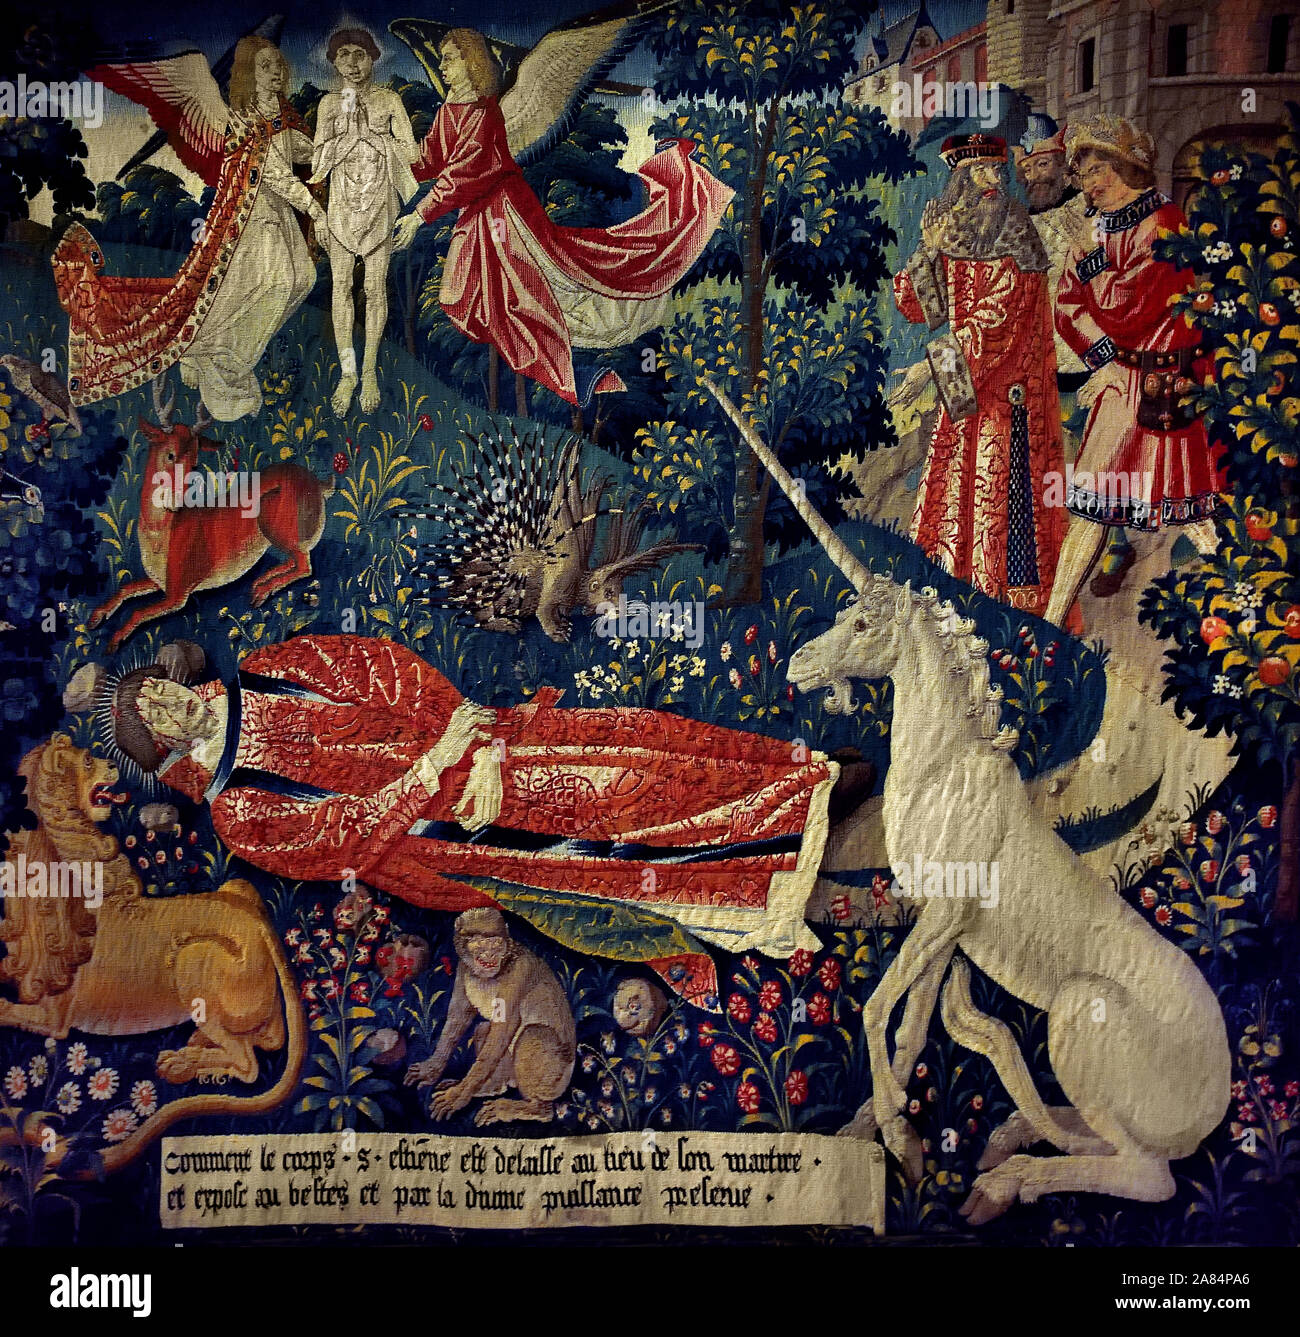 St Stephen's wall hanging, Wild animals pay their respects to the body of St Stephen. Tapestry with woollen and silk thread 1500 15th Cent from The lady and the unicorn series. wool and silk, Cluny Museum - ,Paris,National Museum of the Middle Ages, France, french. Stock Photo